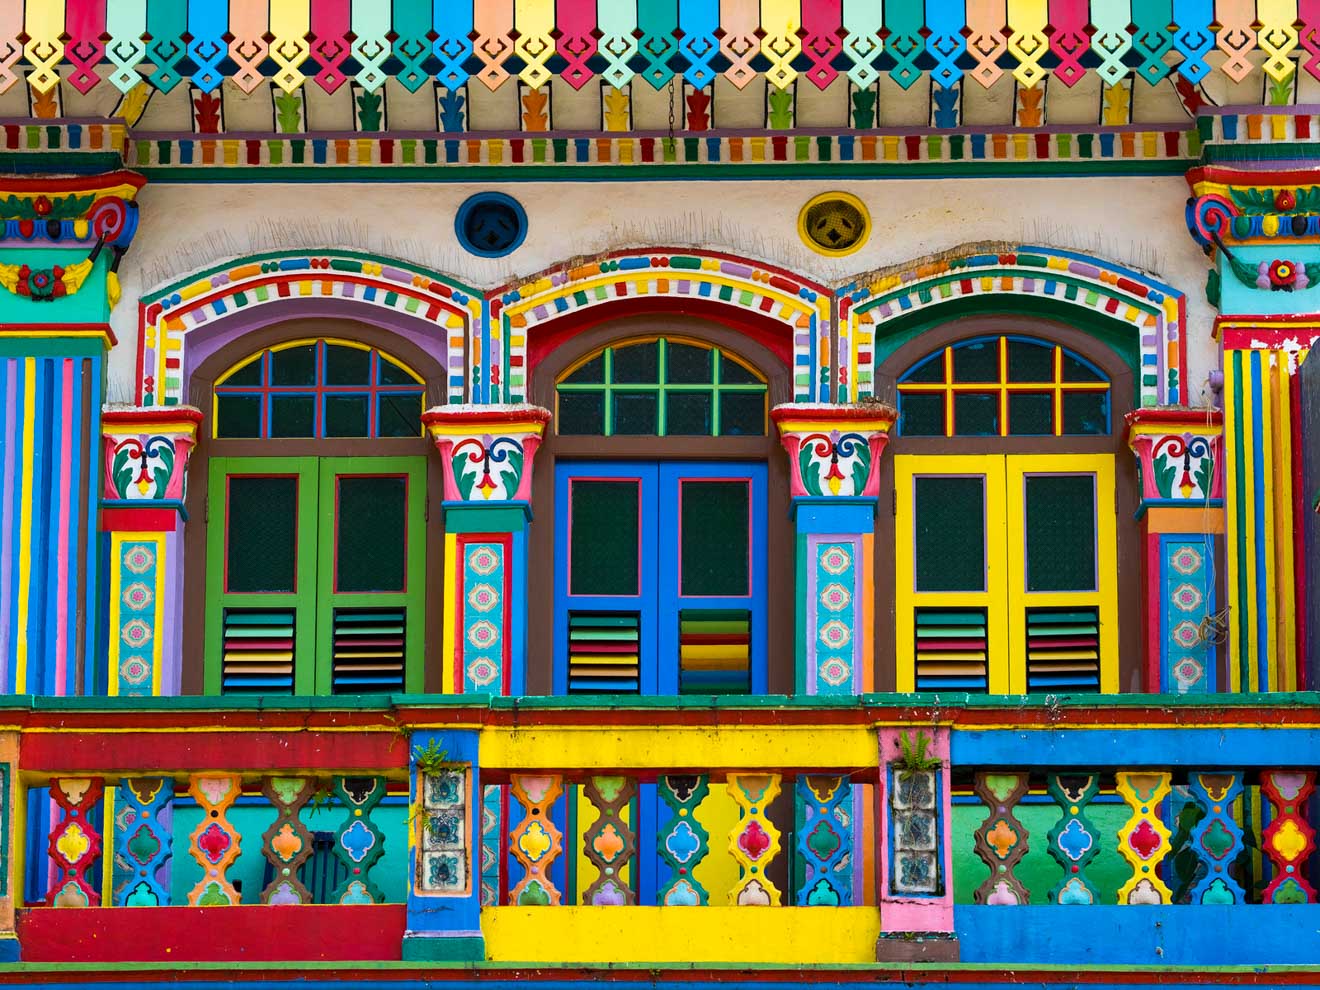 A colorful building with colorful windows in Little India Singapore